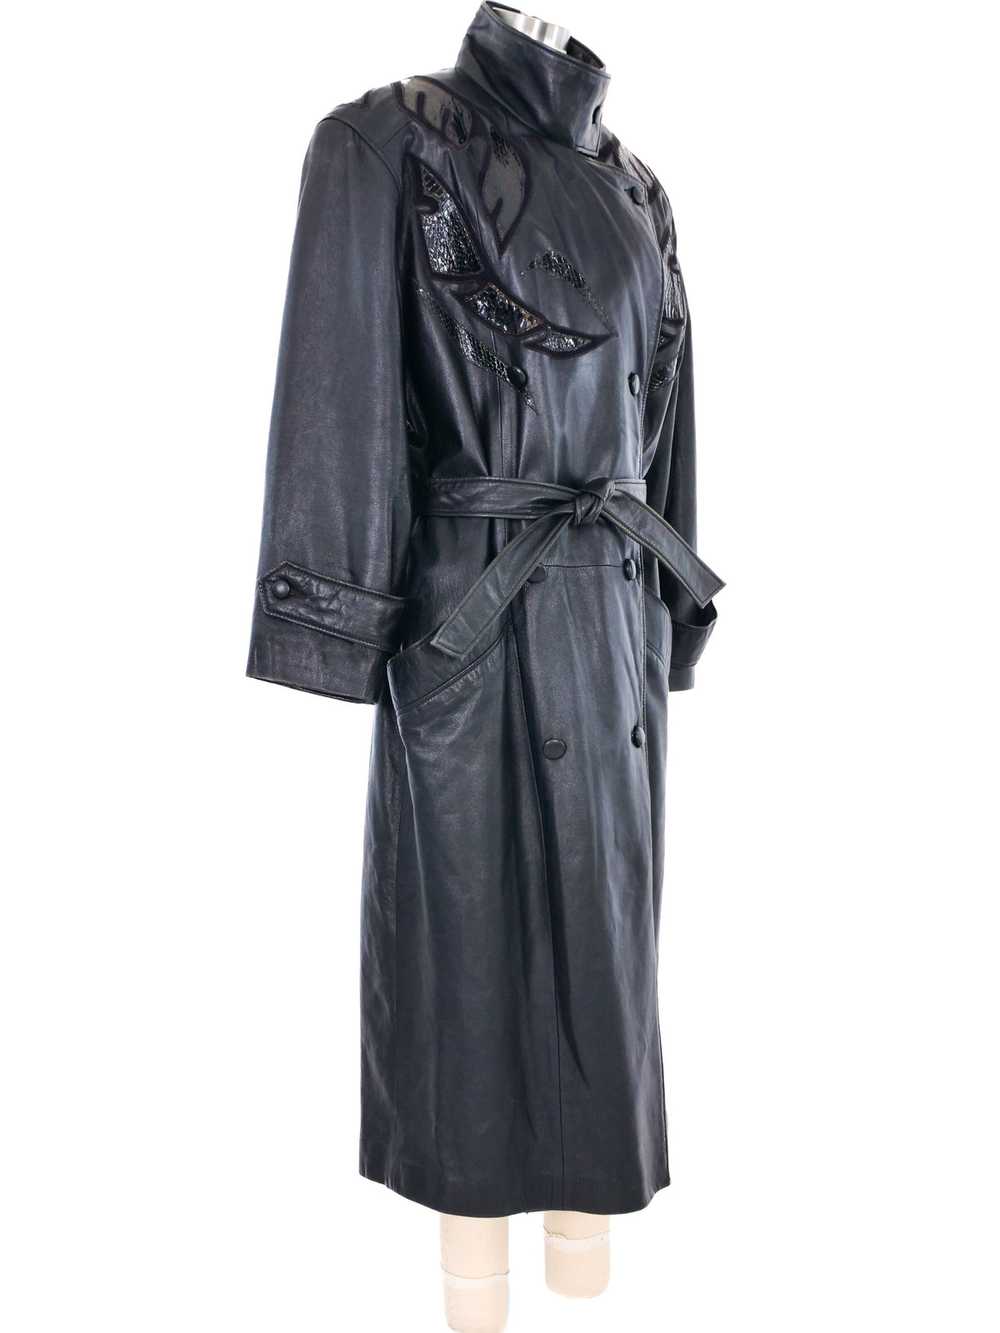 1980s Leather Applique Trench Coat - image 4